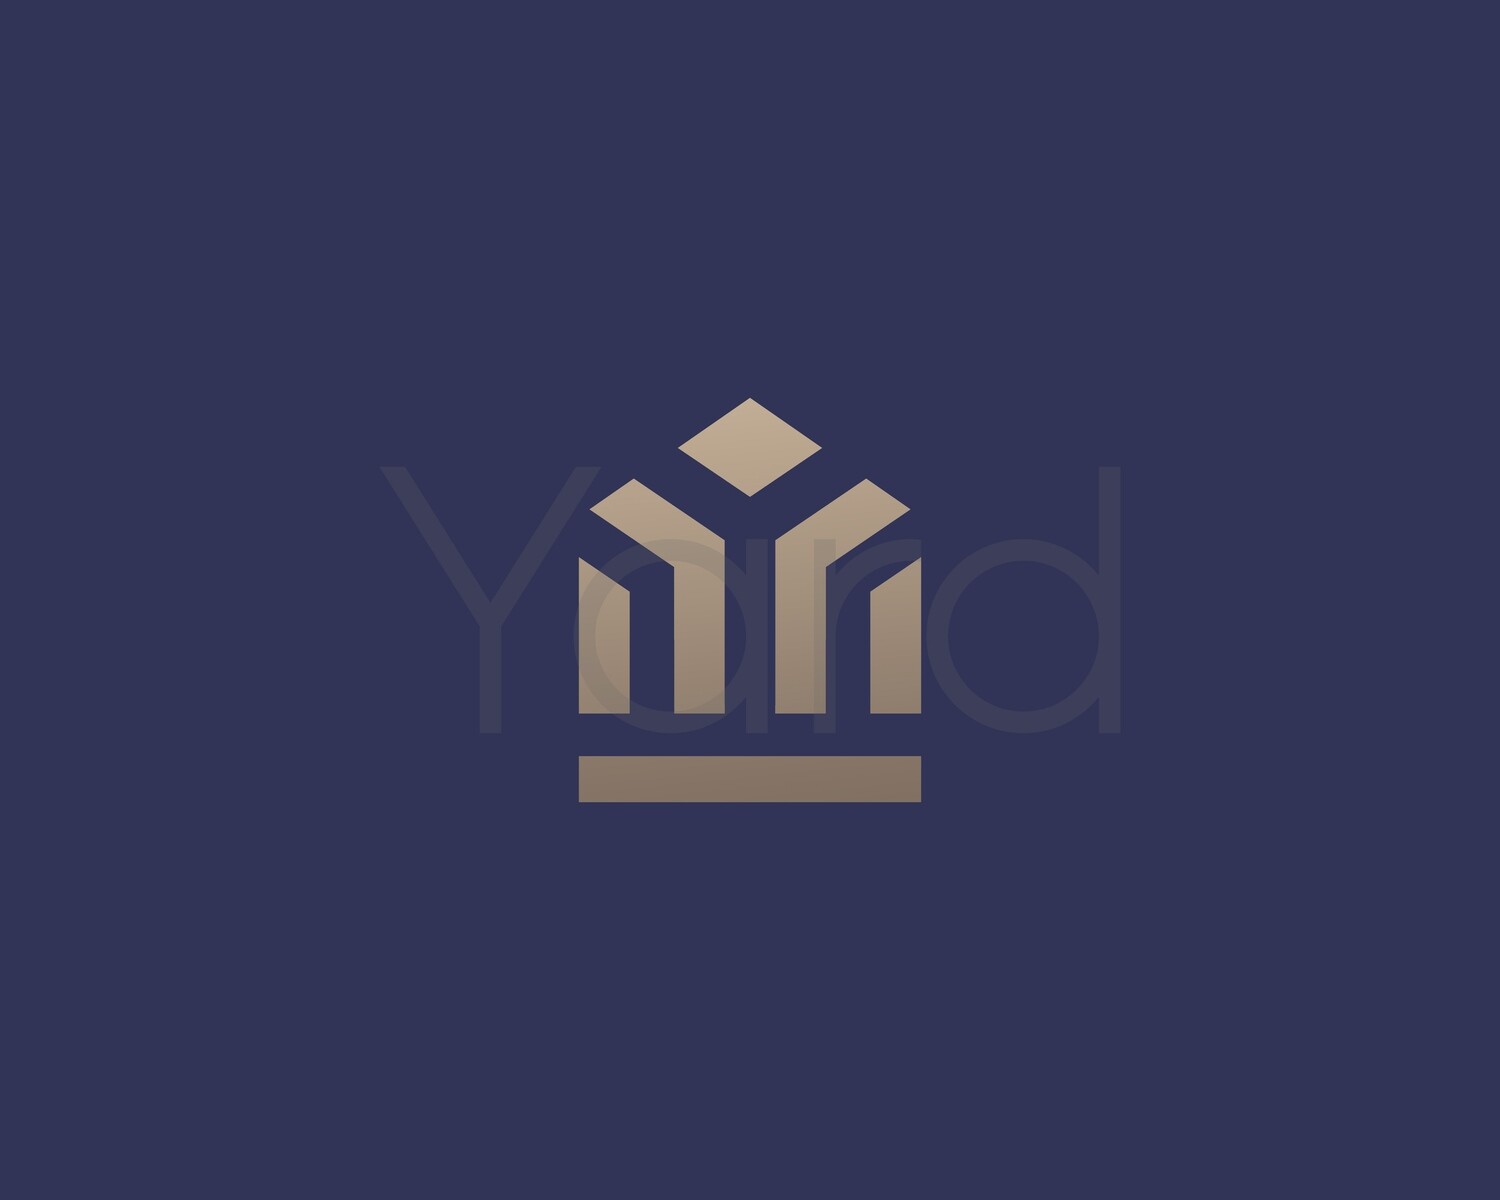 Abstract crown logo. Premium house icon. Home sign. Luxury real estate logotype.